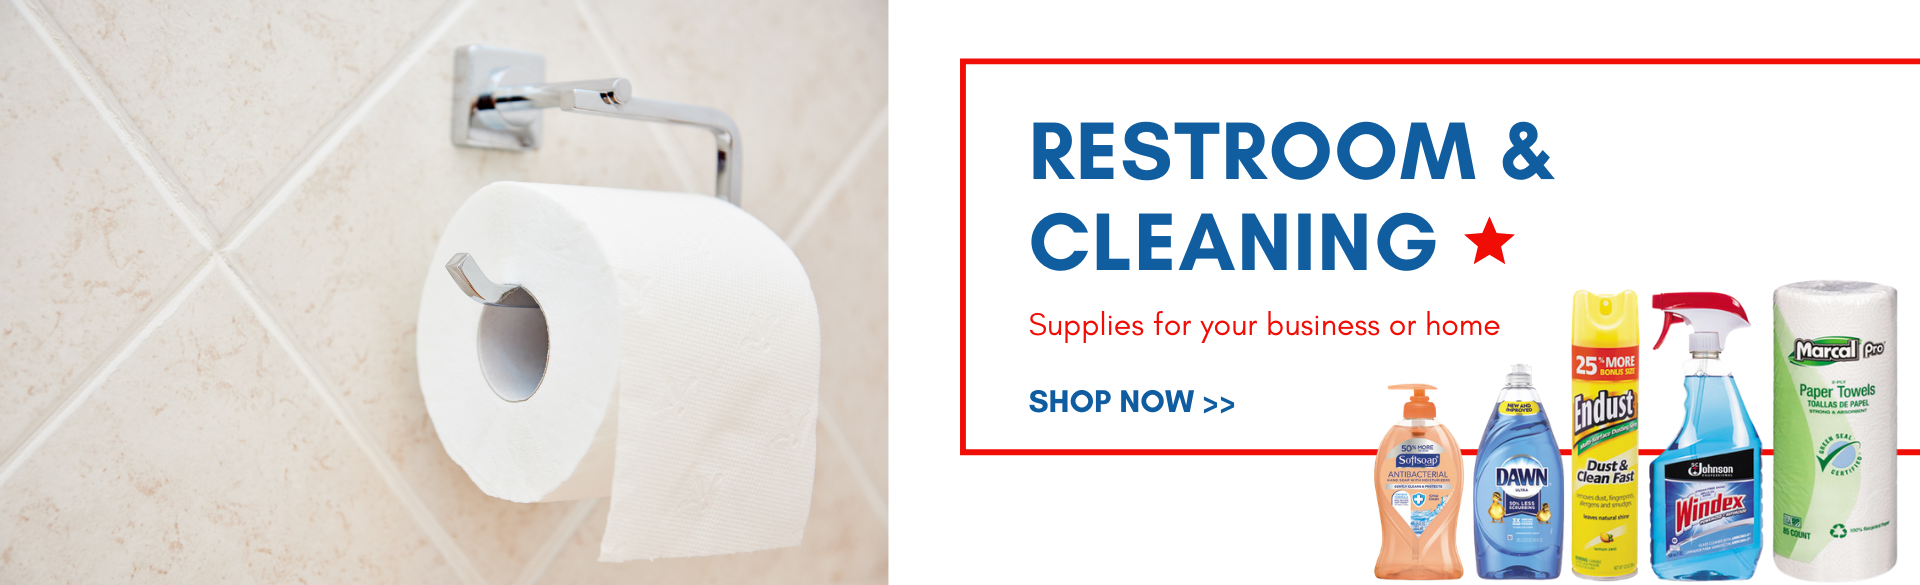 Buy restroom and cleaning supplies at US Casehouse